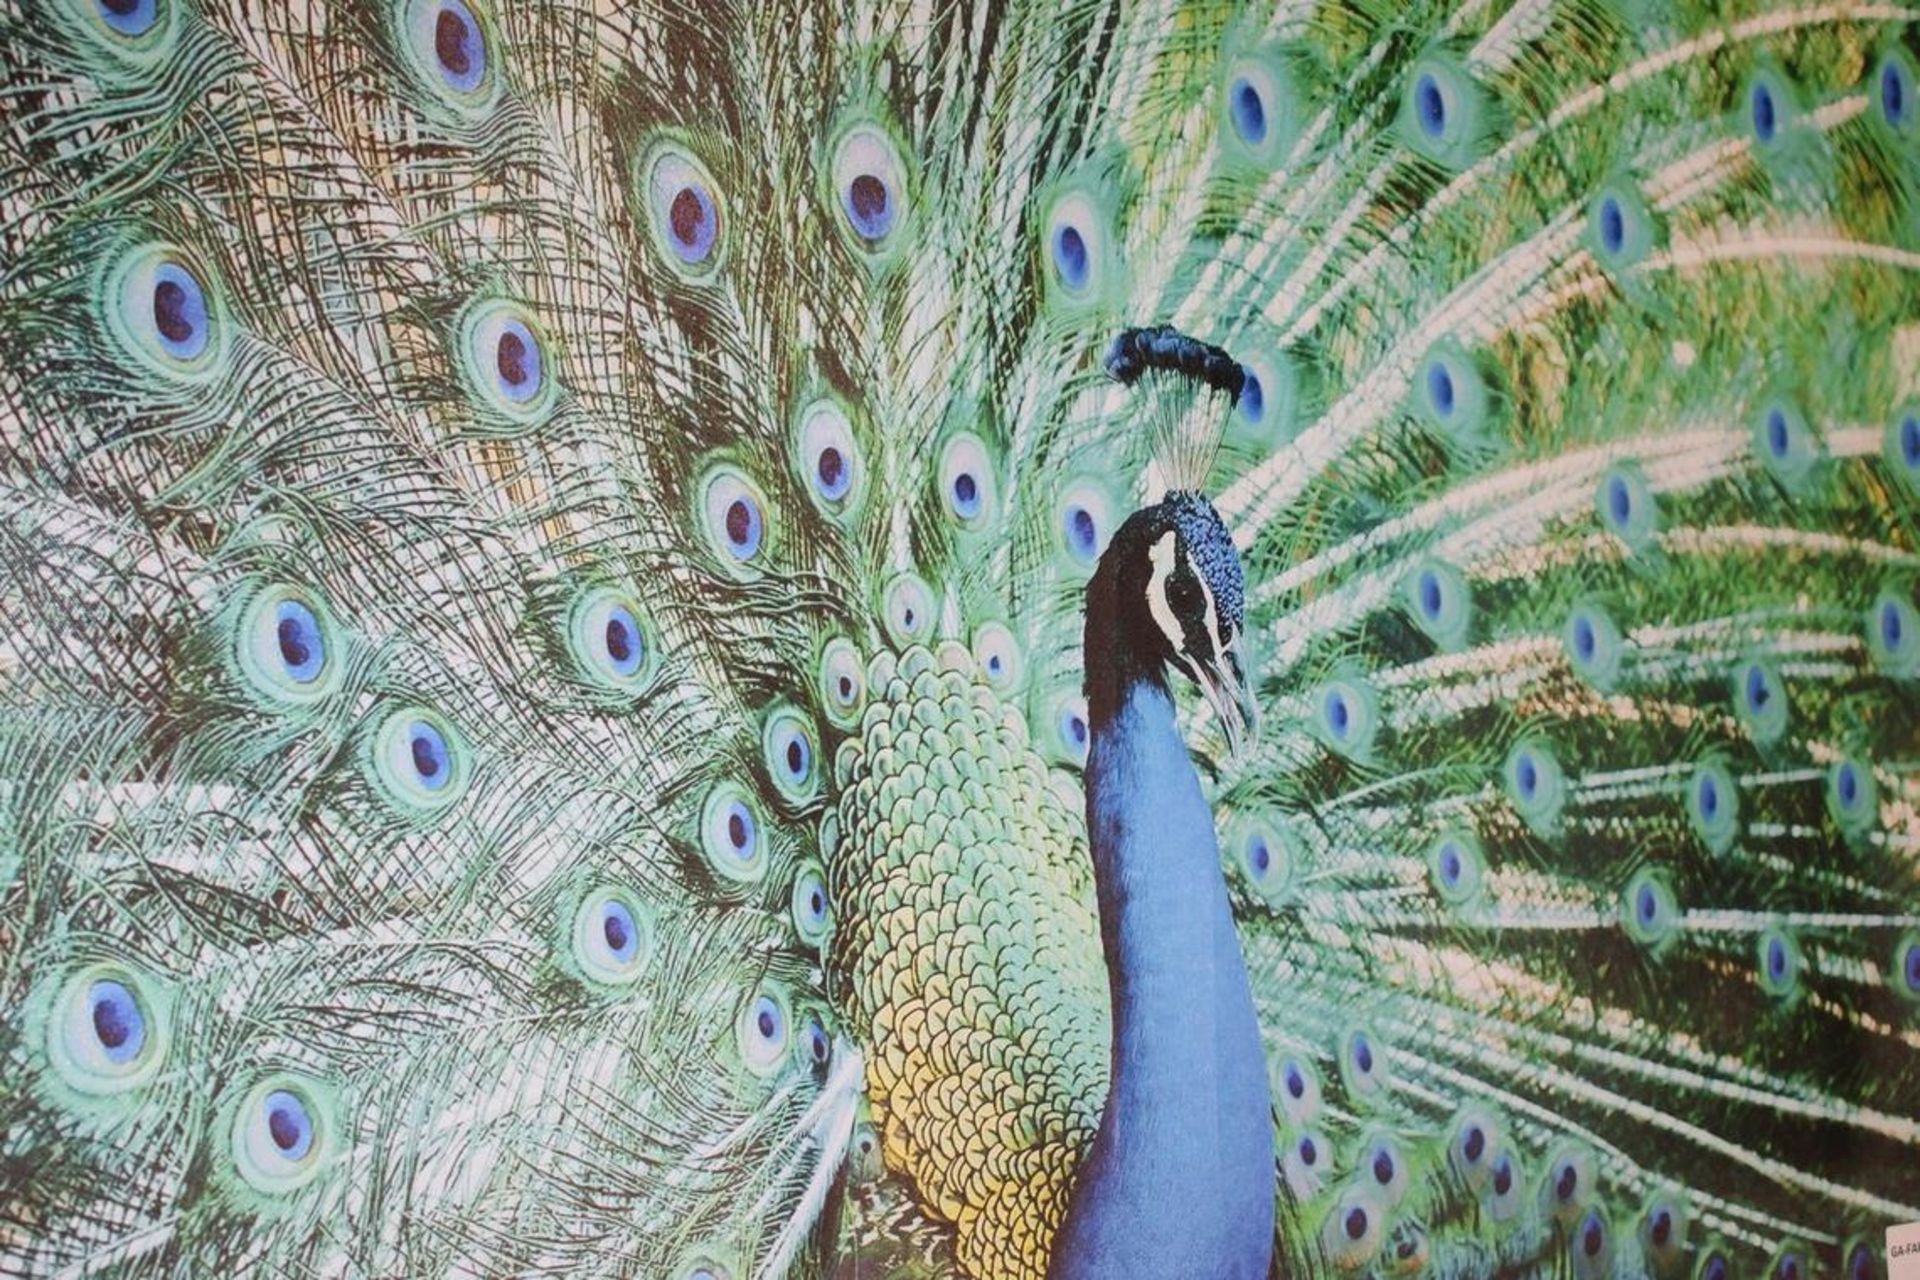 The Beautiful Peacock Canvas Rrp £50 (18547)(Appraisals Available Upon Request) (Pictures Are For